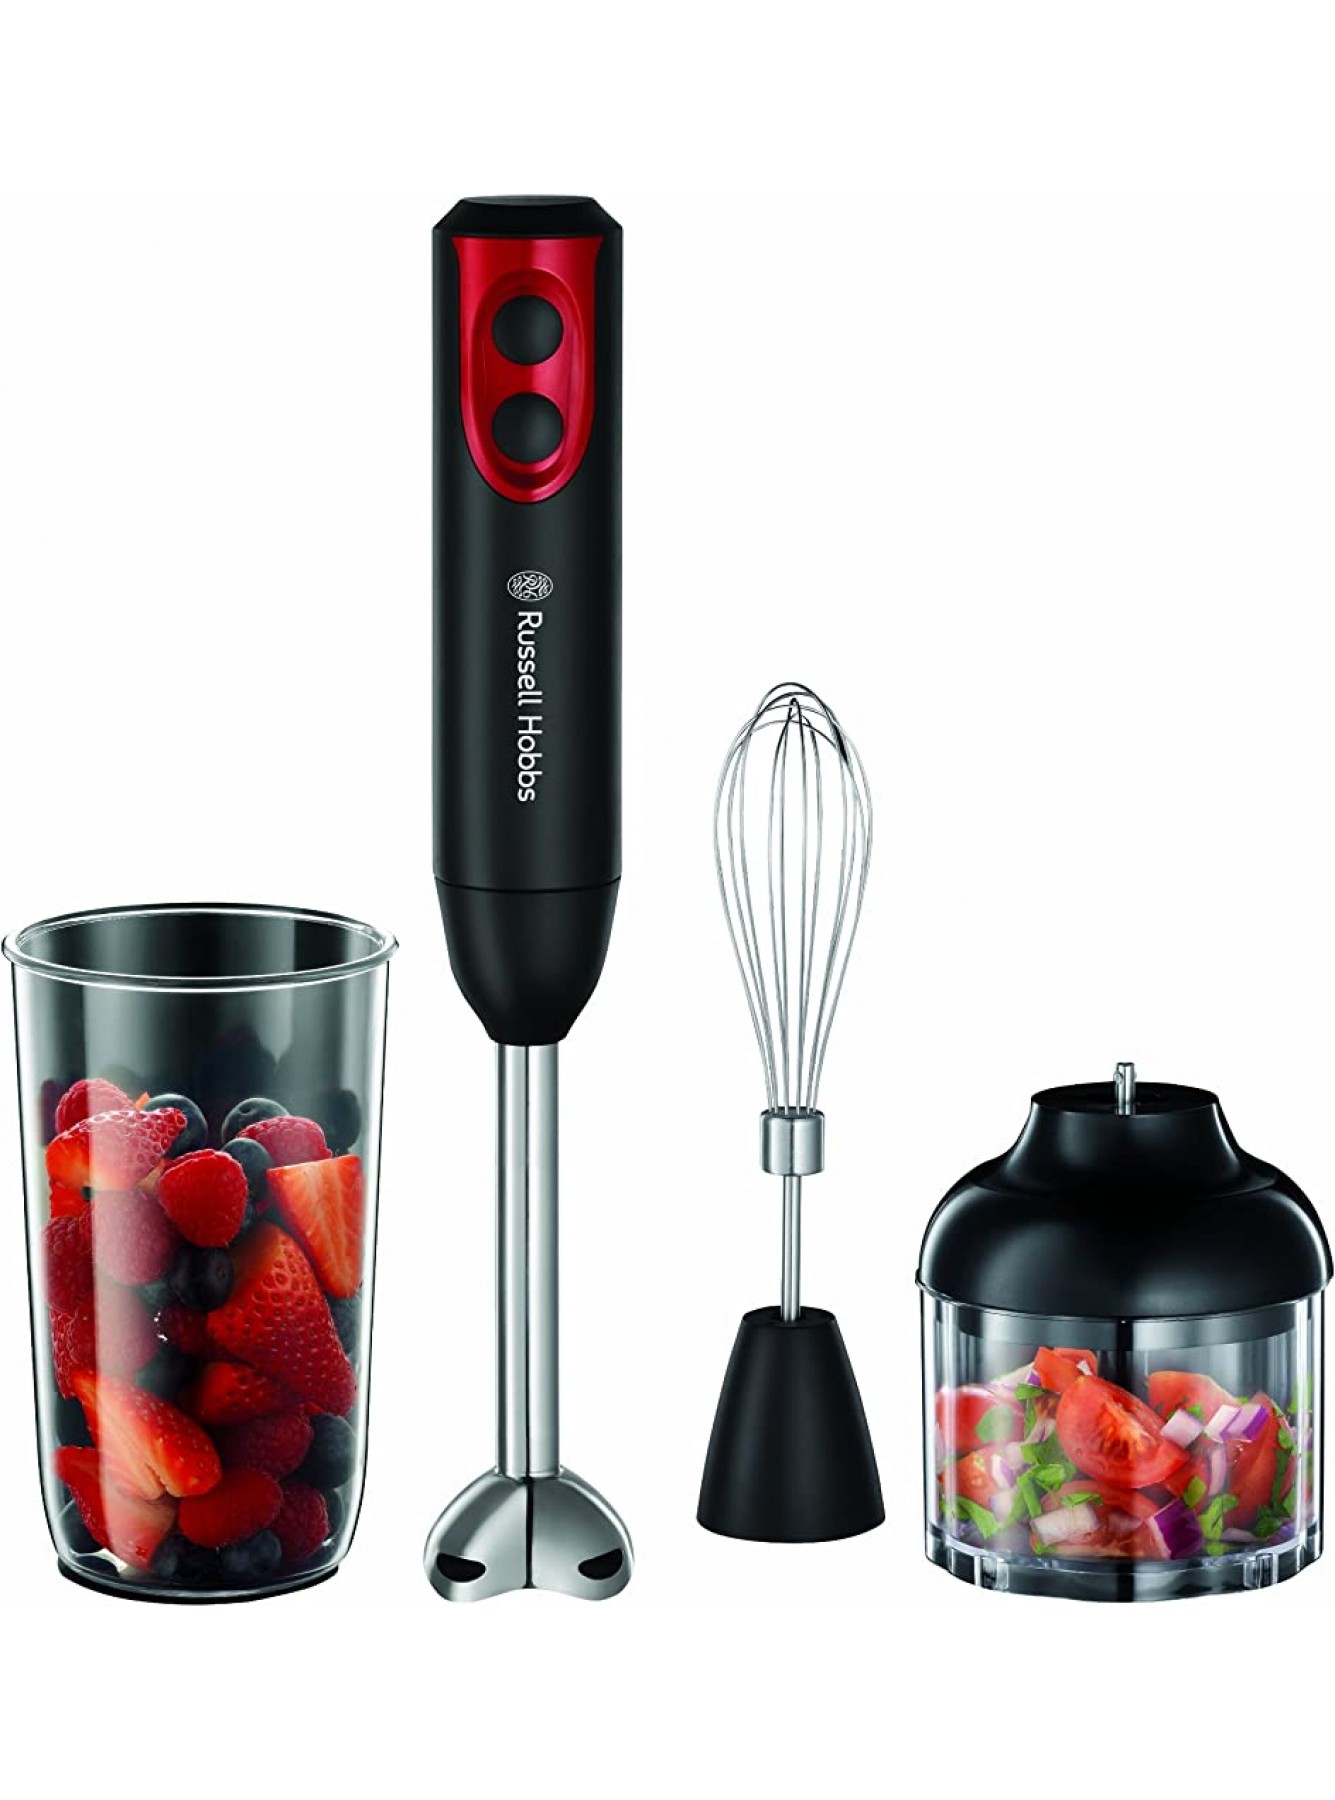 Russell Hobbs 18980 3-in-1 Hand Blender Plastic 400 W 0.5 Litre Black and Red - NMKEV4R1